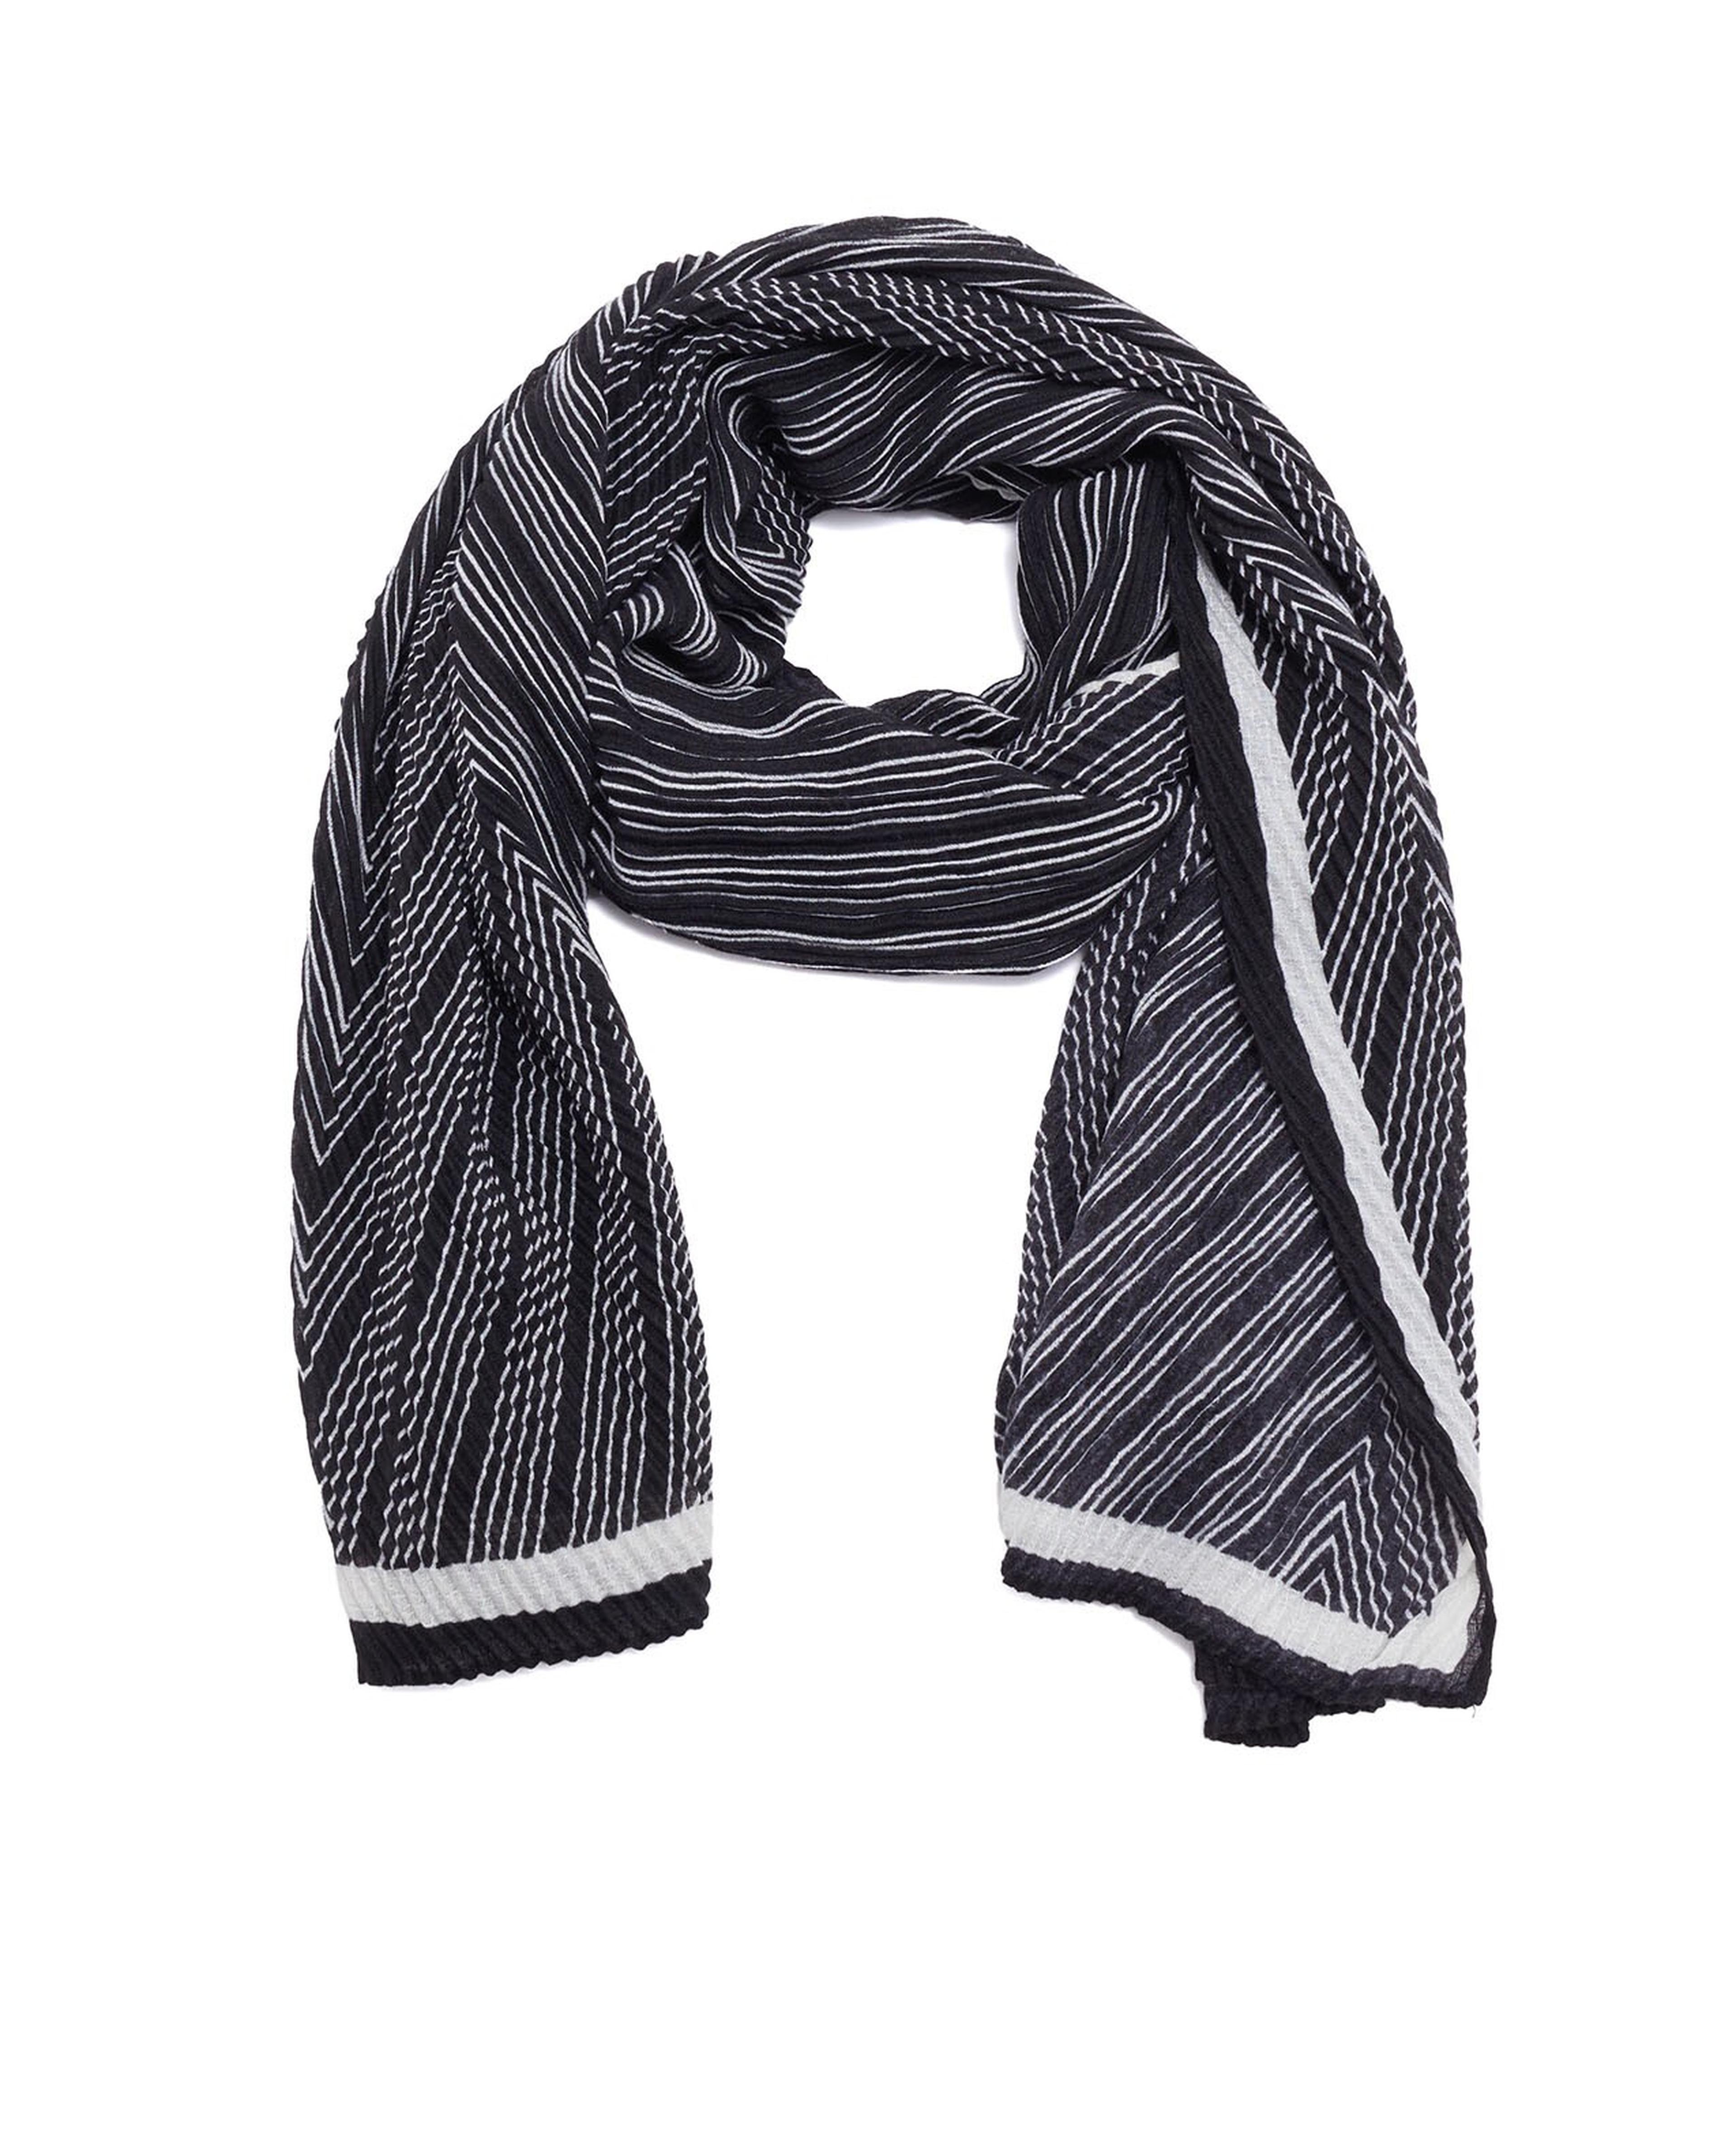 Chevron Patterned Scarf